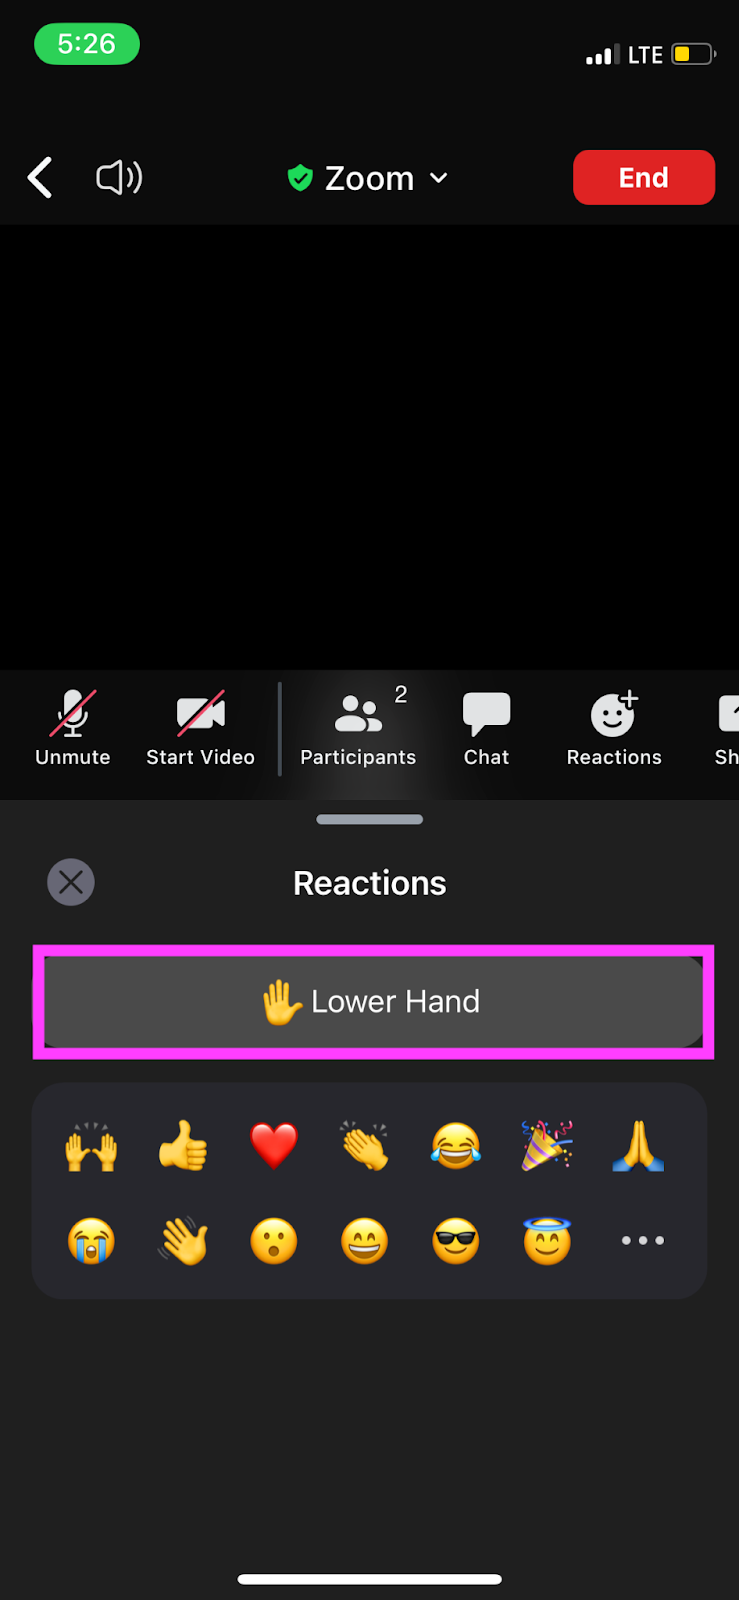 How to raise your hand in Zoom on mobile - Tap on Lower Hand